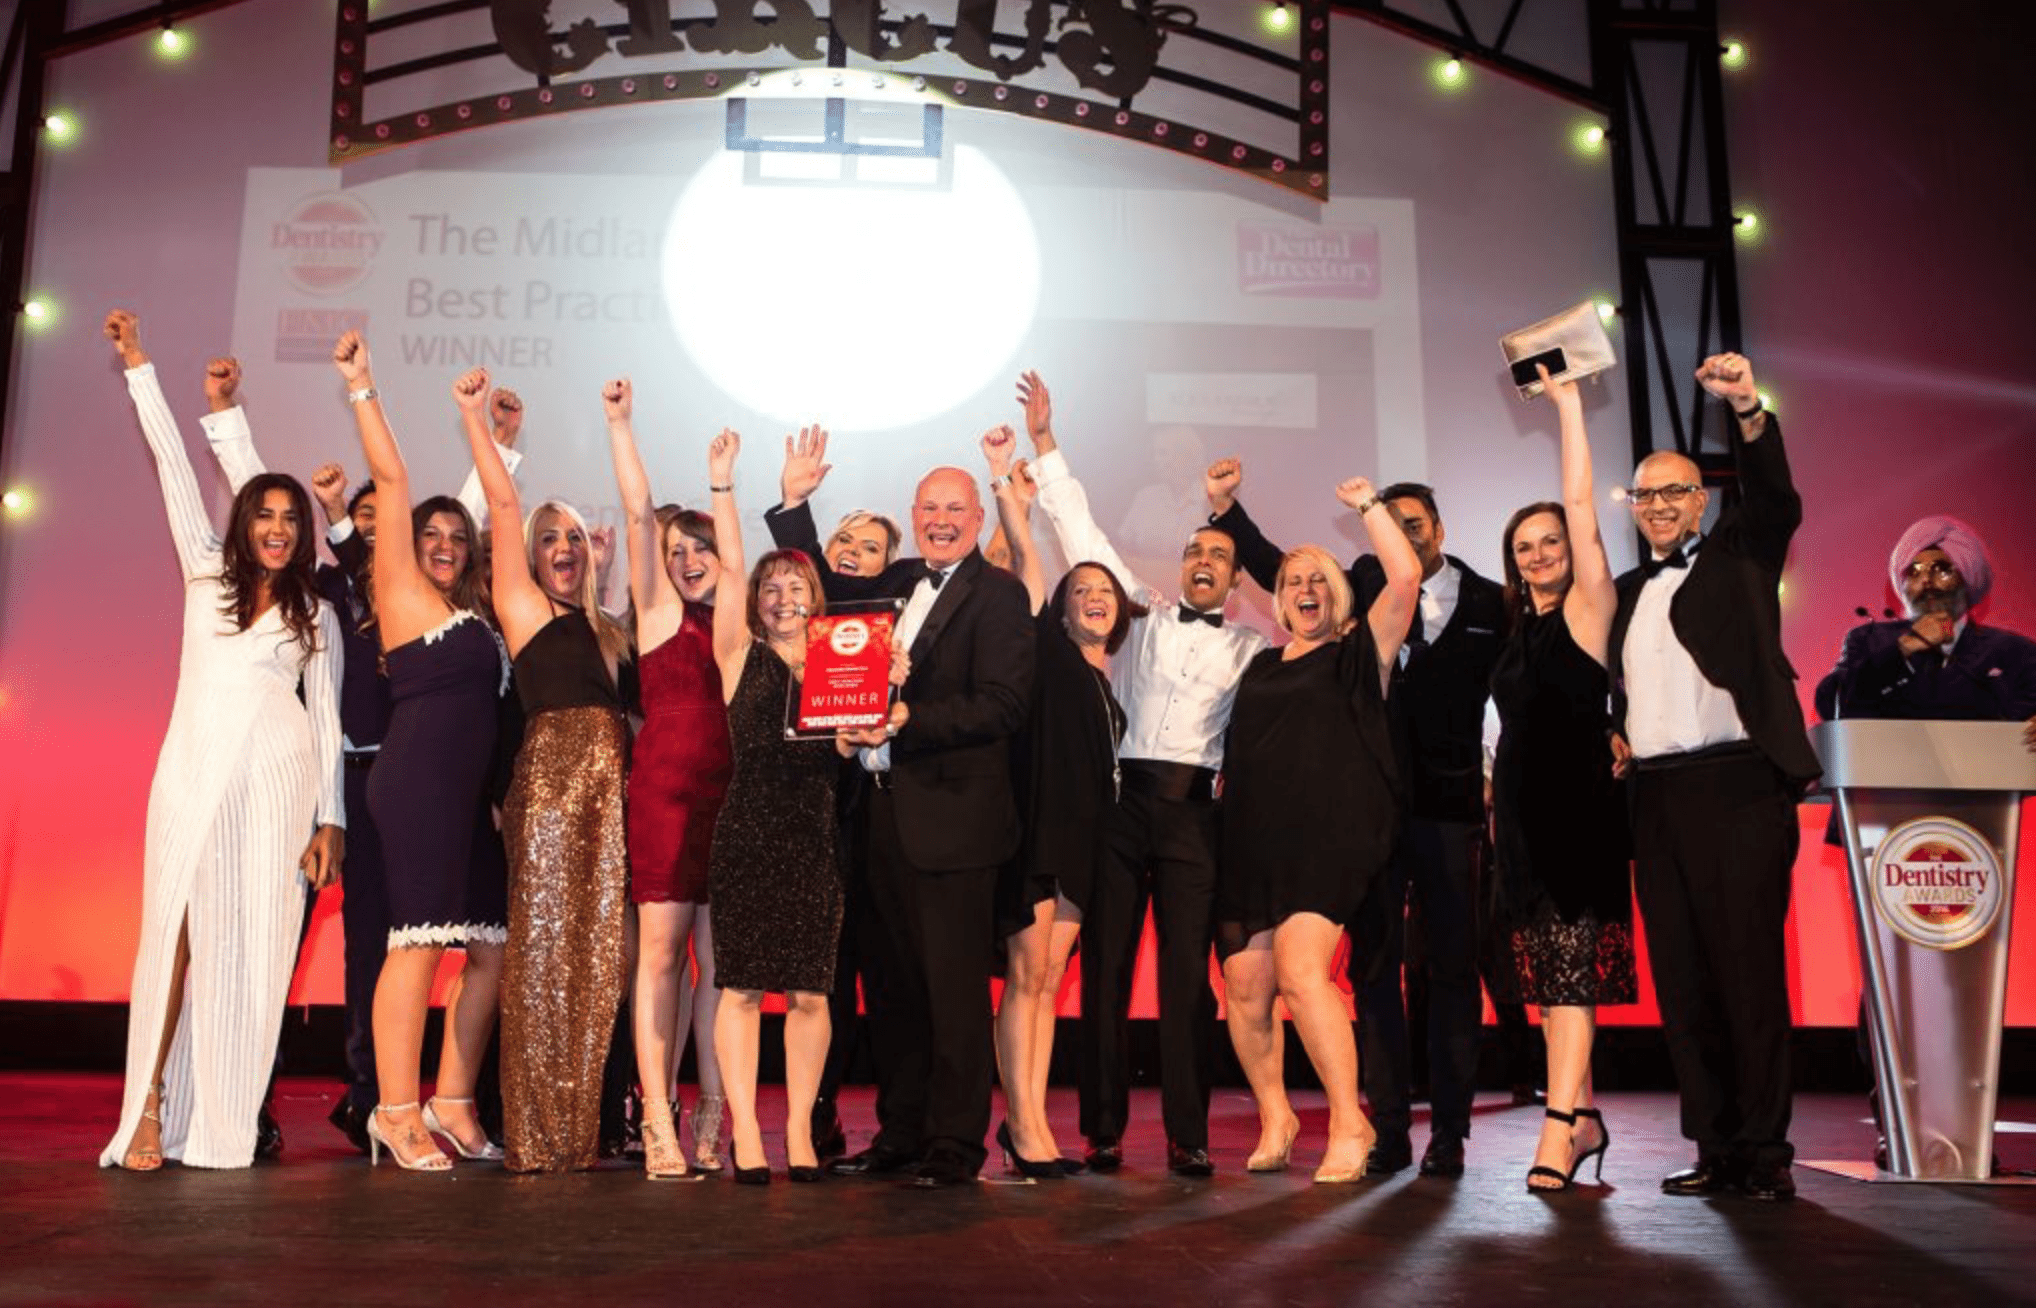 4 tips if you think dental awards are worth it